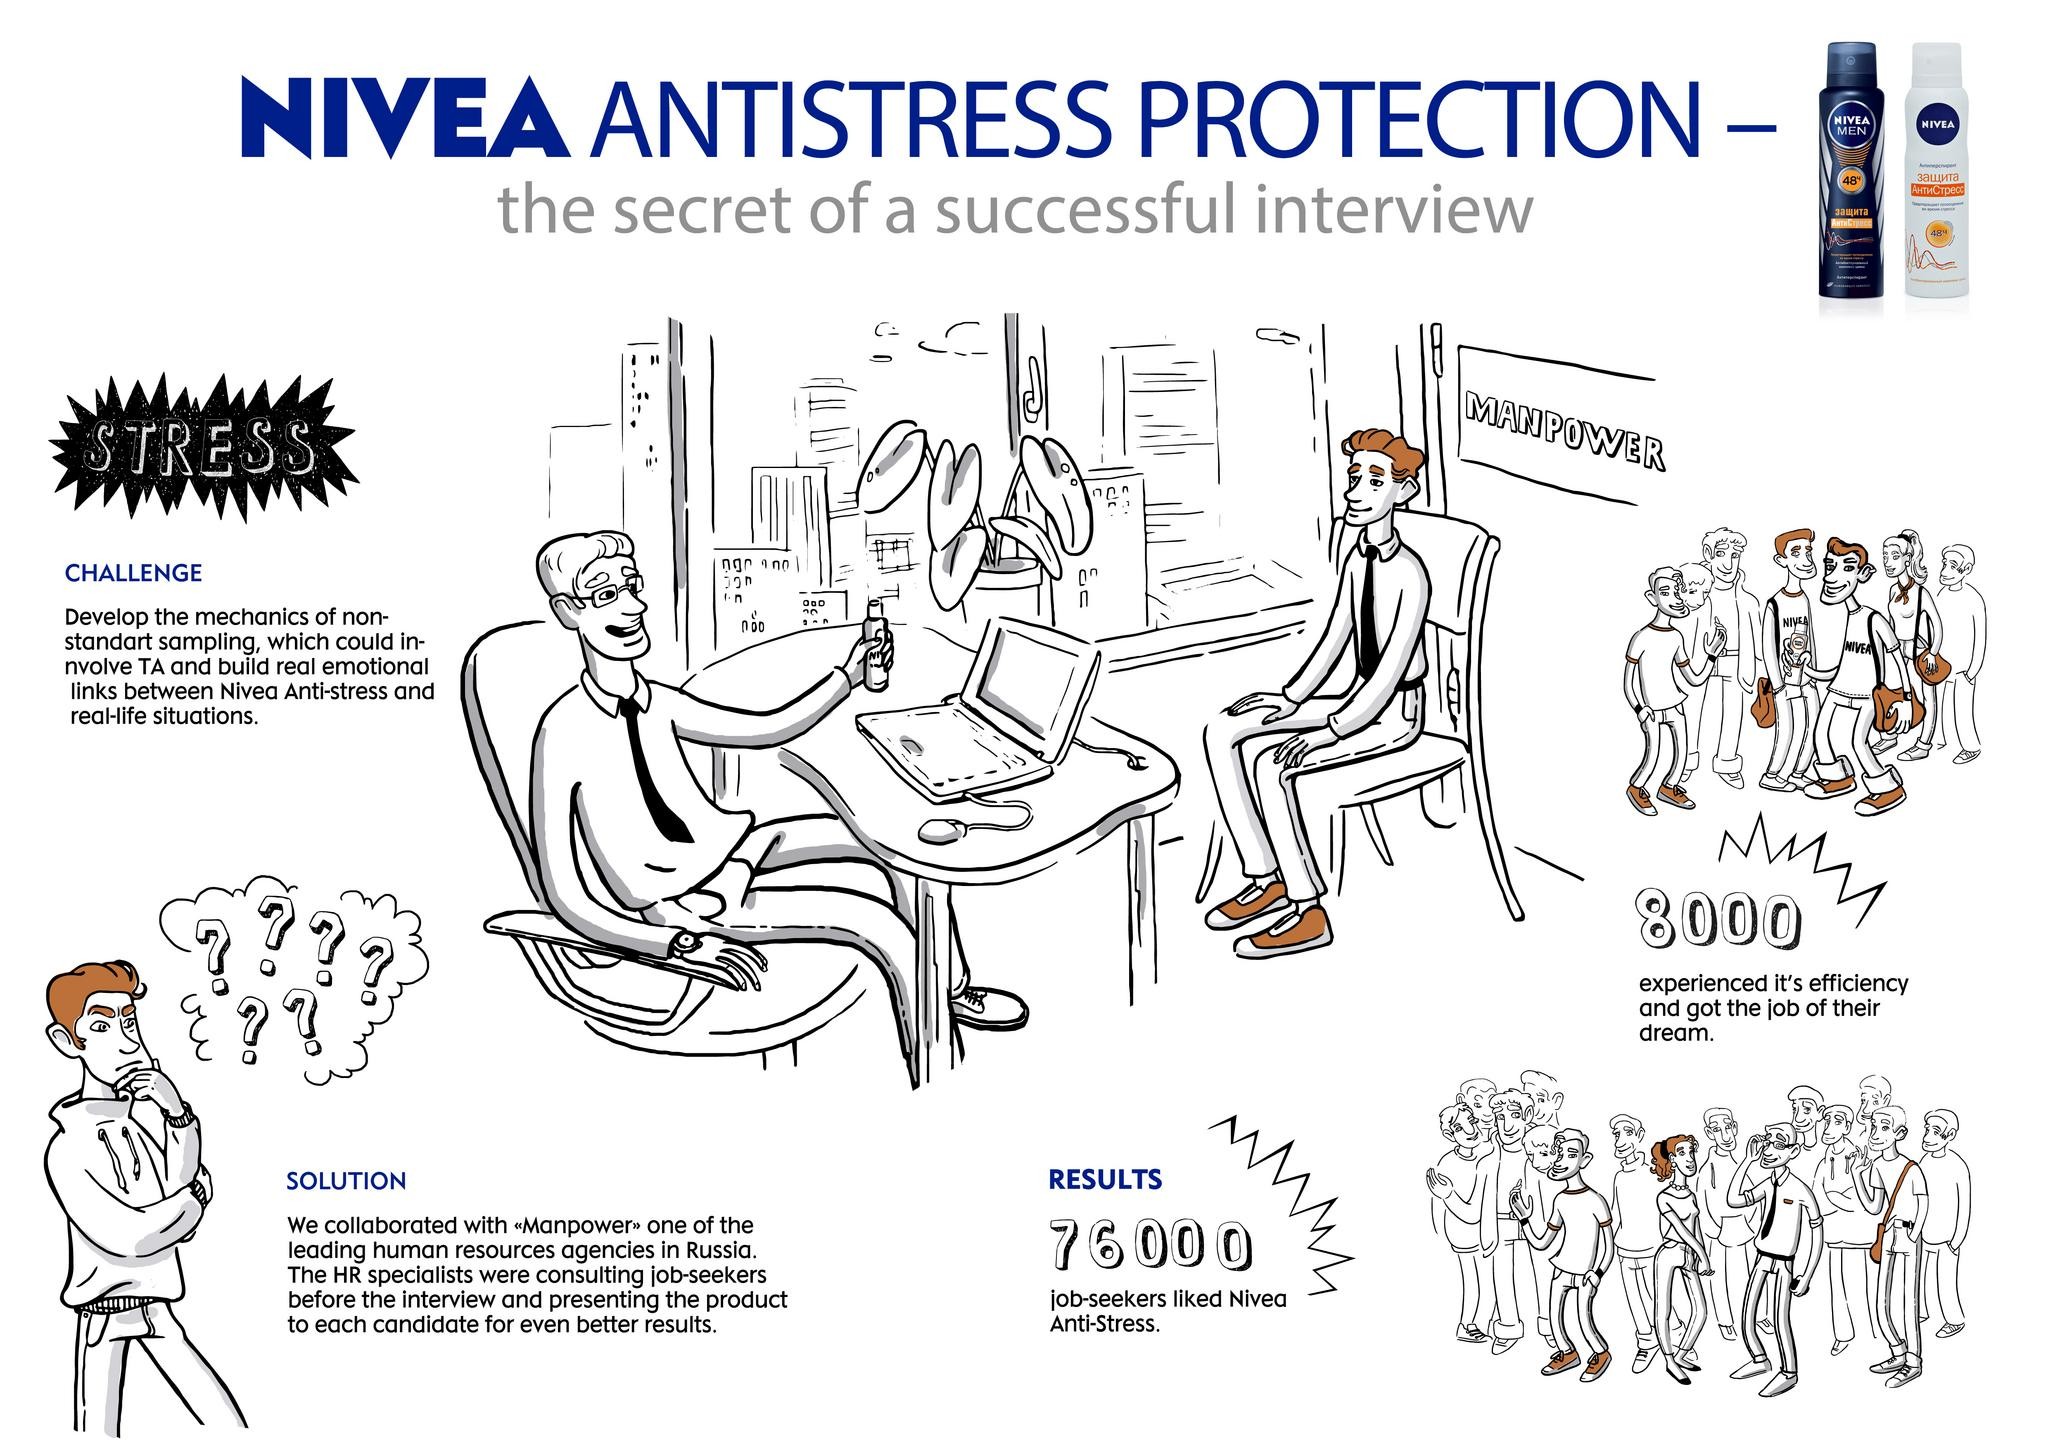 NIVEA ANTI STRESS PROTECTION — THE SECRET OF A SUCCESSFUL INTERVIEW